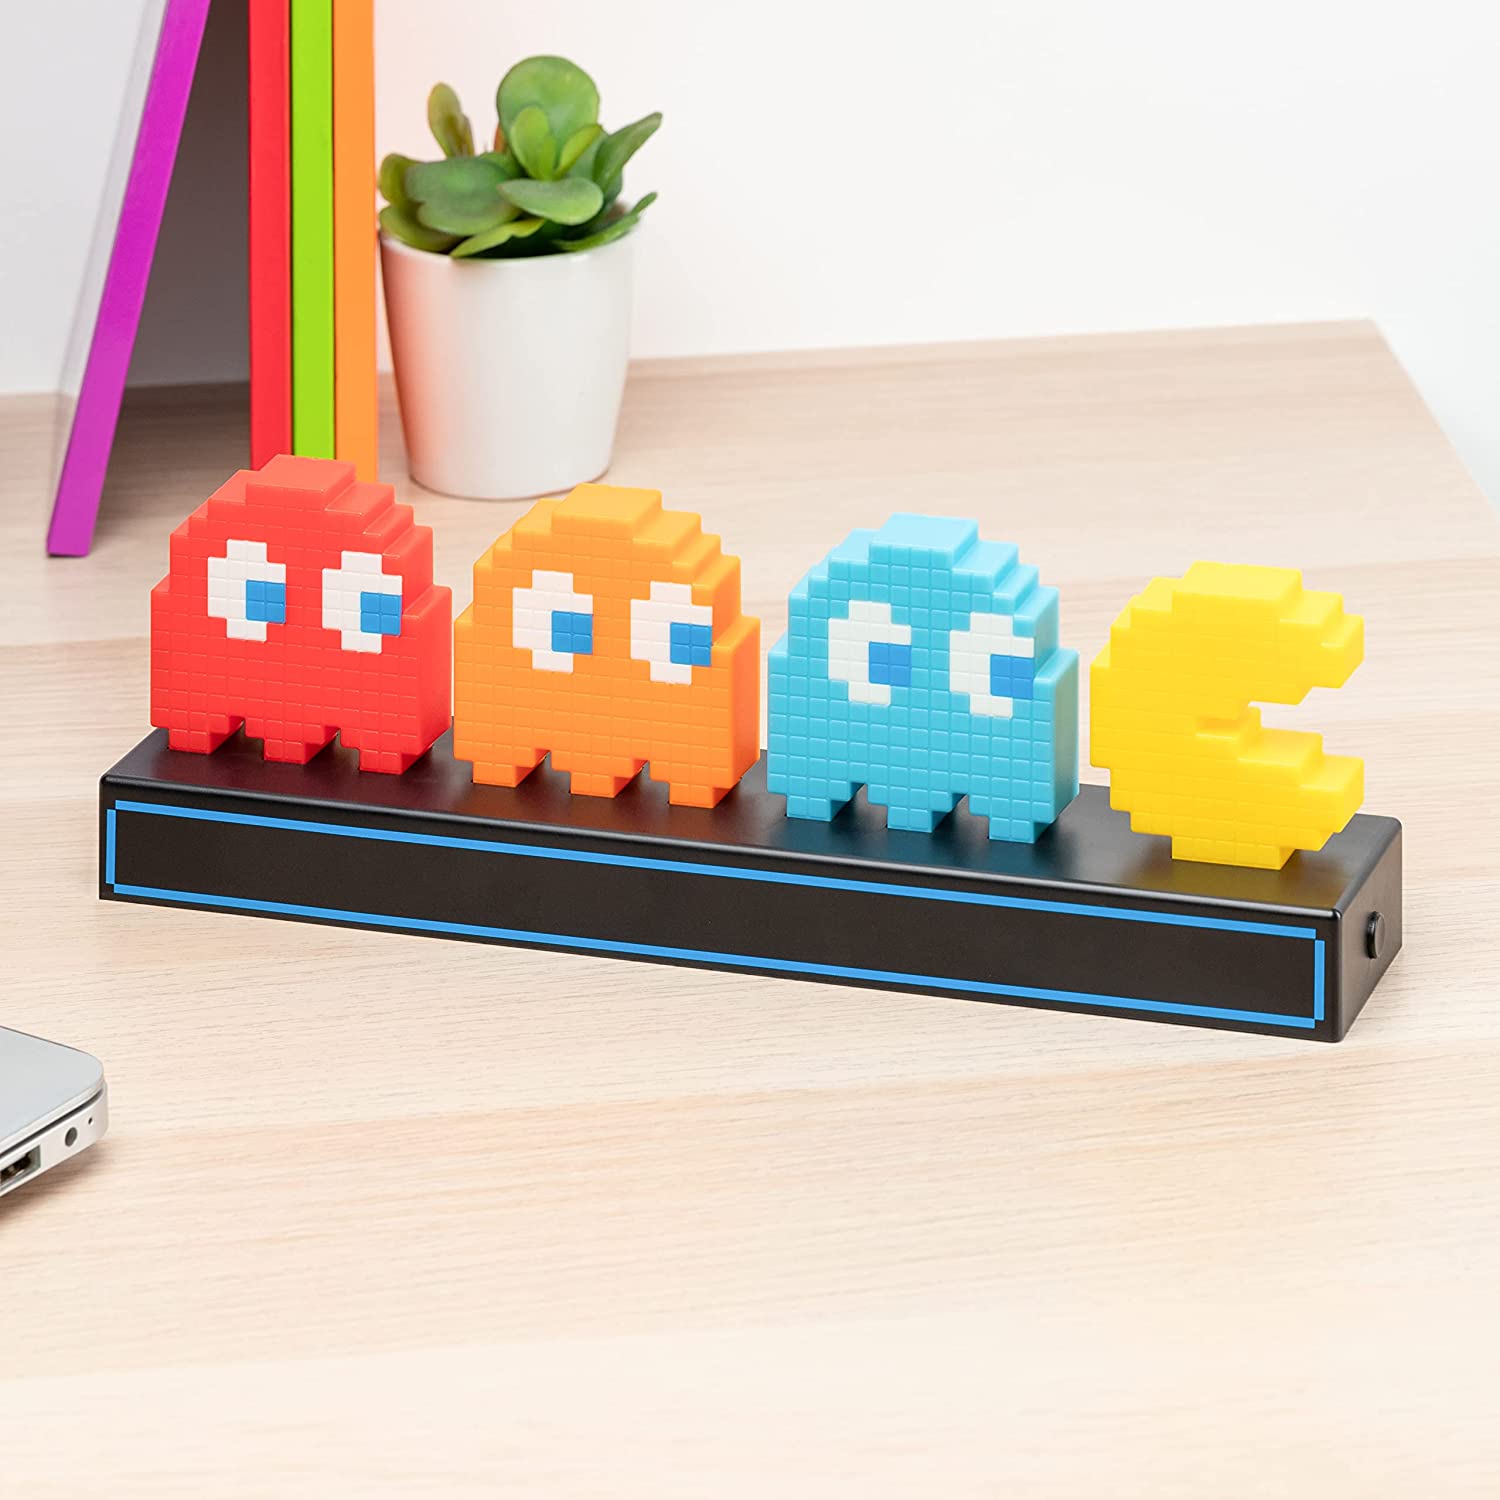 A retro 80's light featuring Pac-Man being chased by three ghosts.